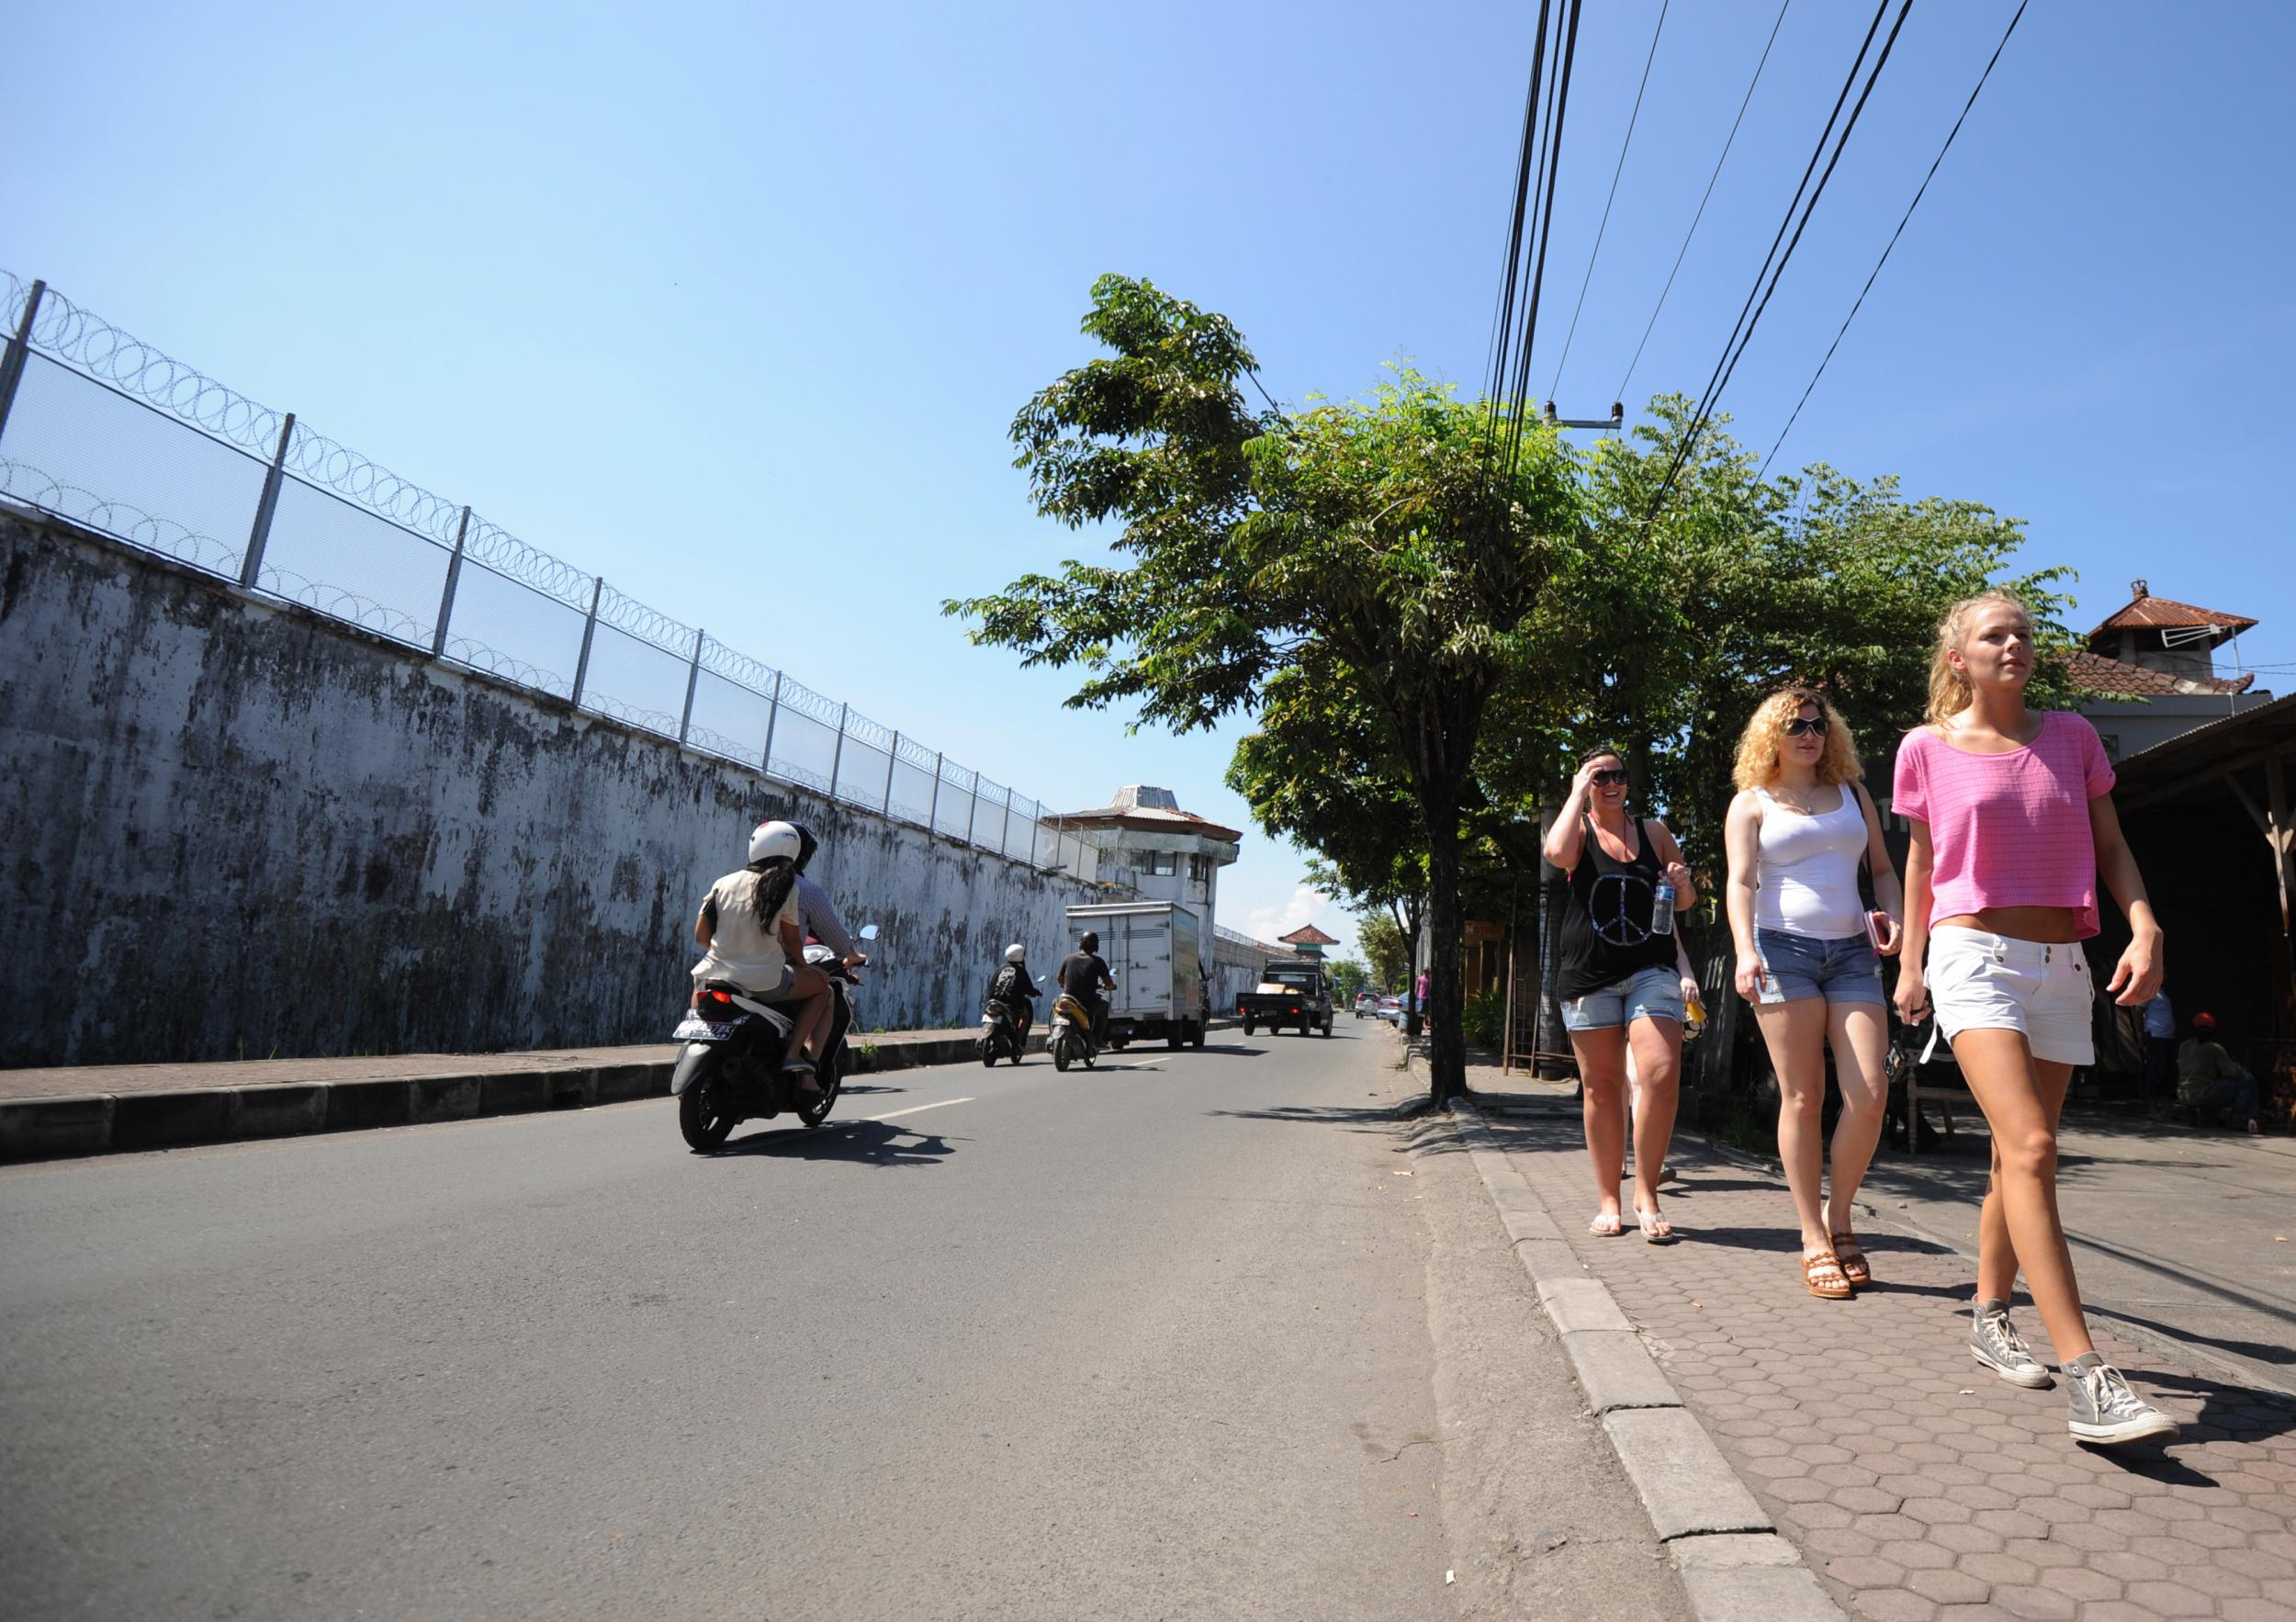 Tourists walk along a street in Denpasar, where an American woman allegedly threw her baby from a moving car